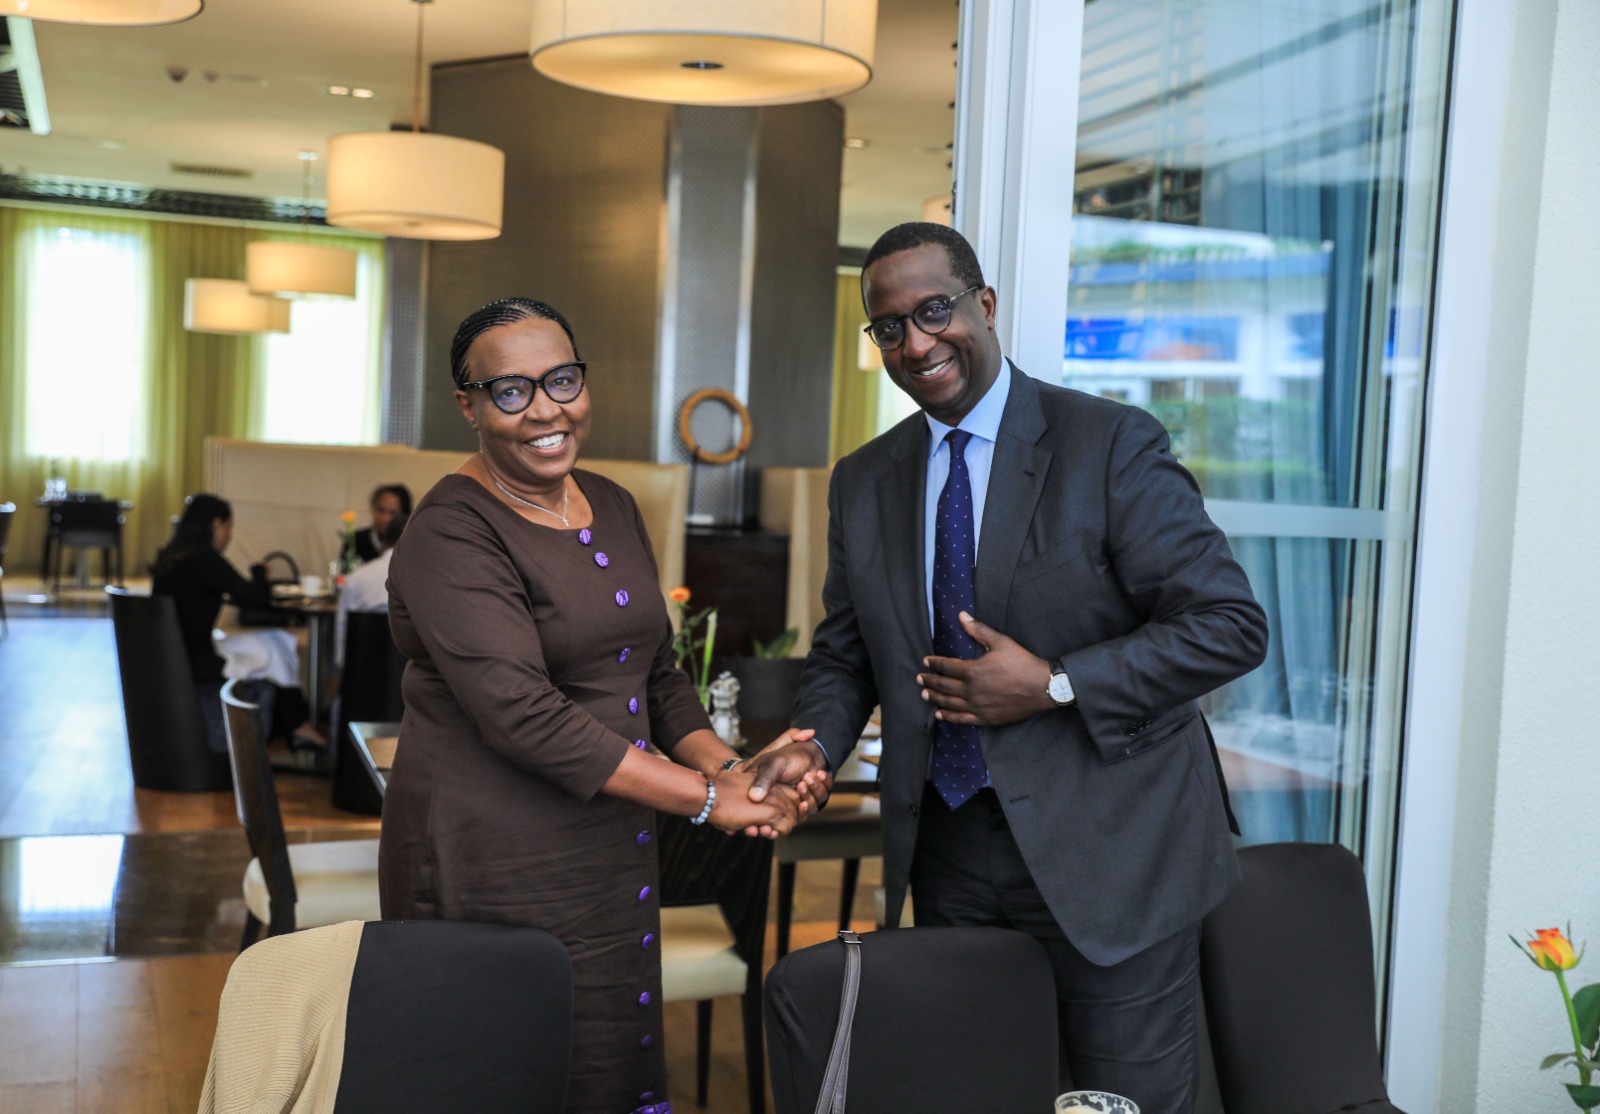  The Executive Director (ED) of DiDe Rwanda held a meeting with the president of Interpeace